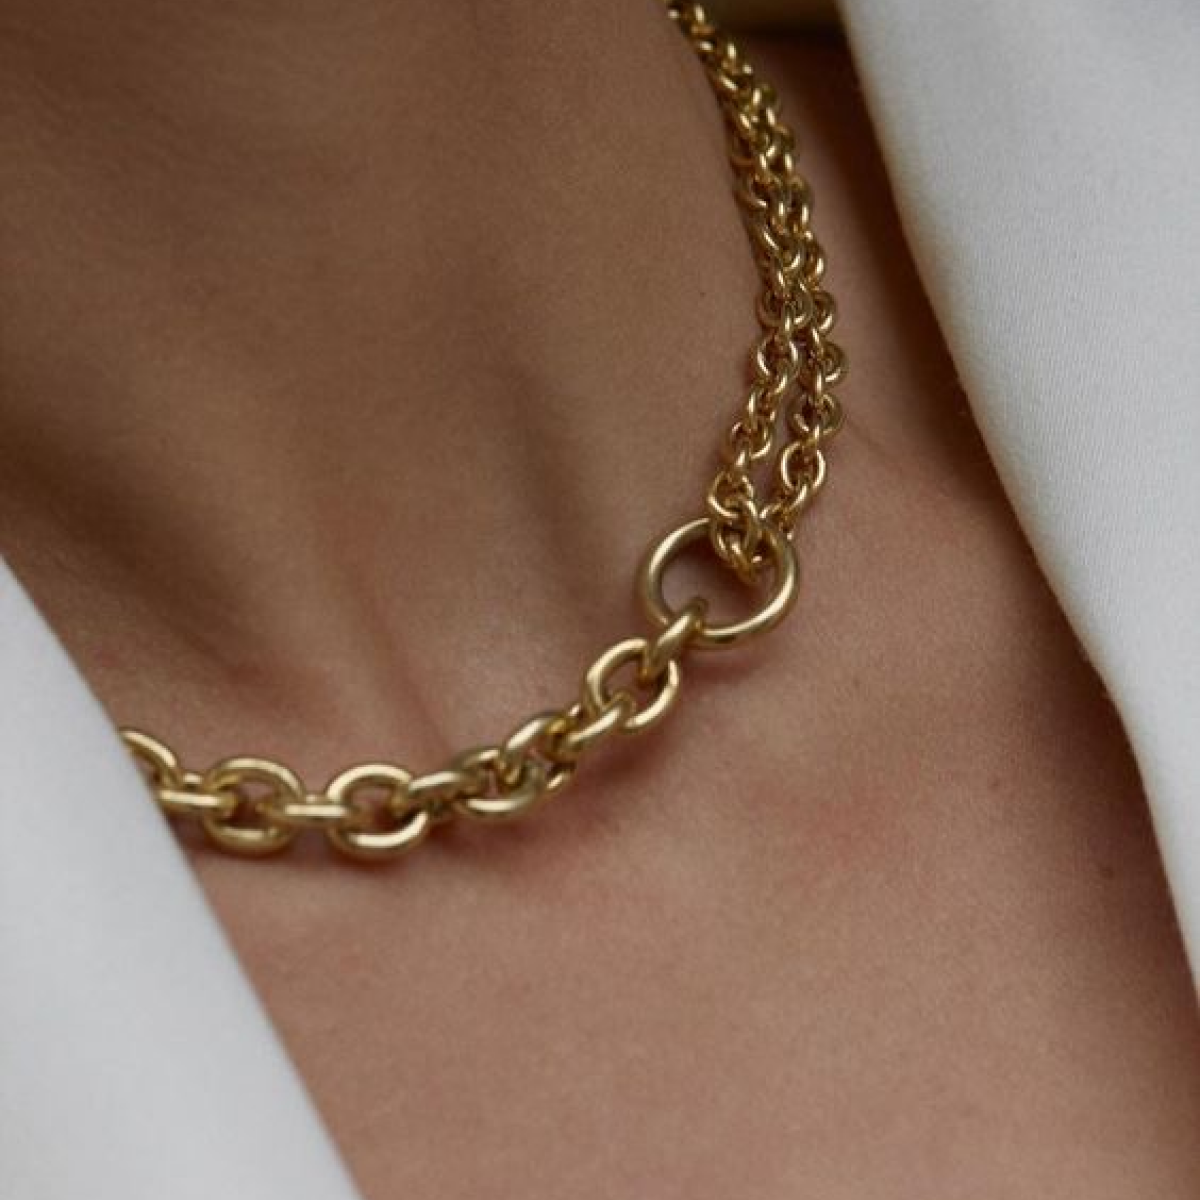 Handmade 18k Gold Vermeil Plated Double Layer Choker Necklace on a woman wearing white formal jacket